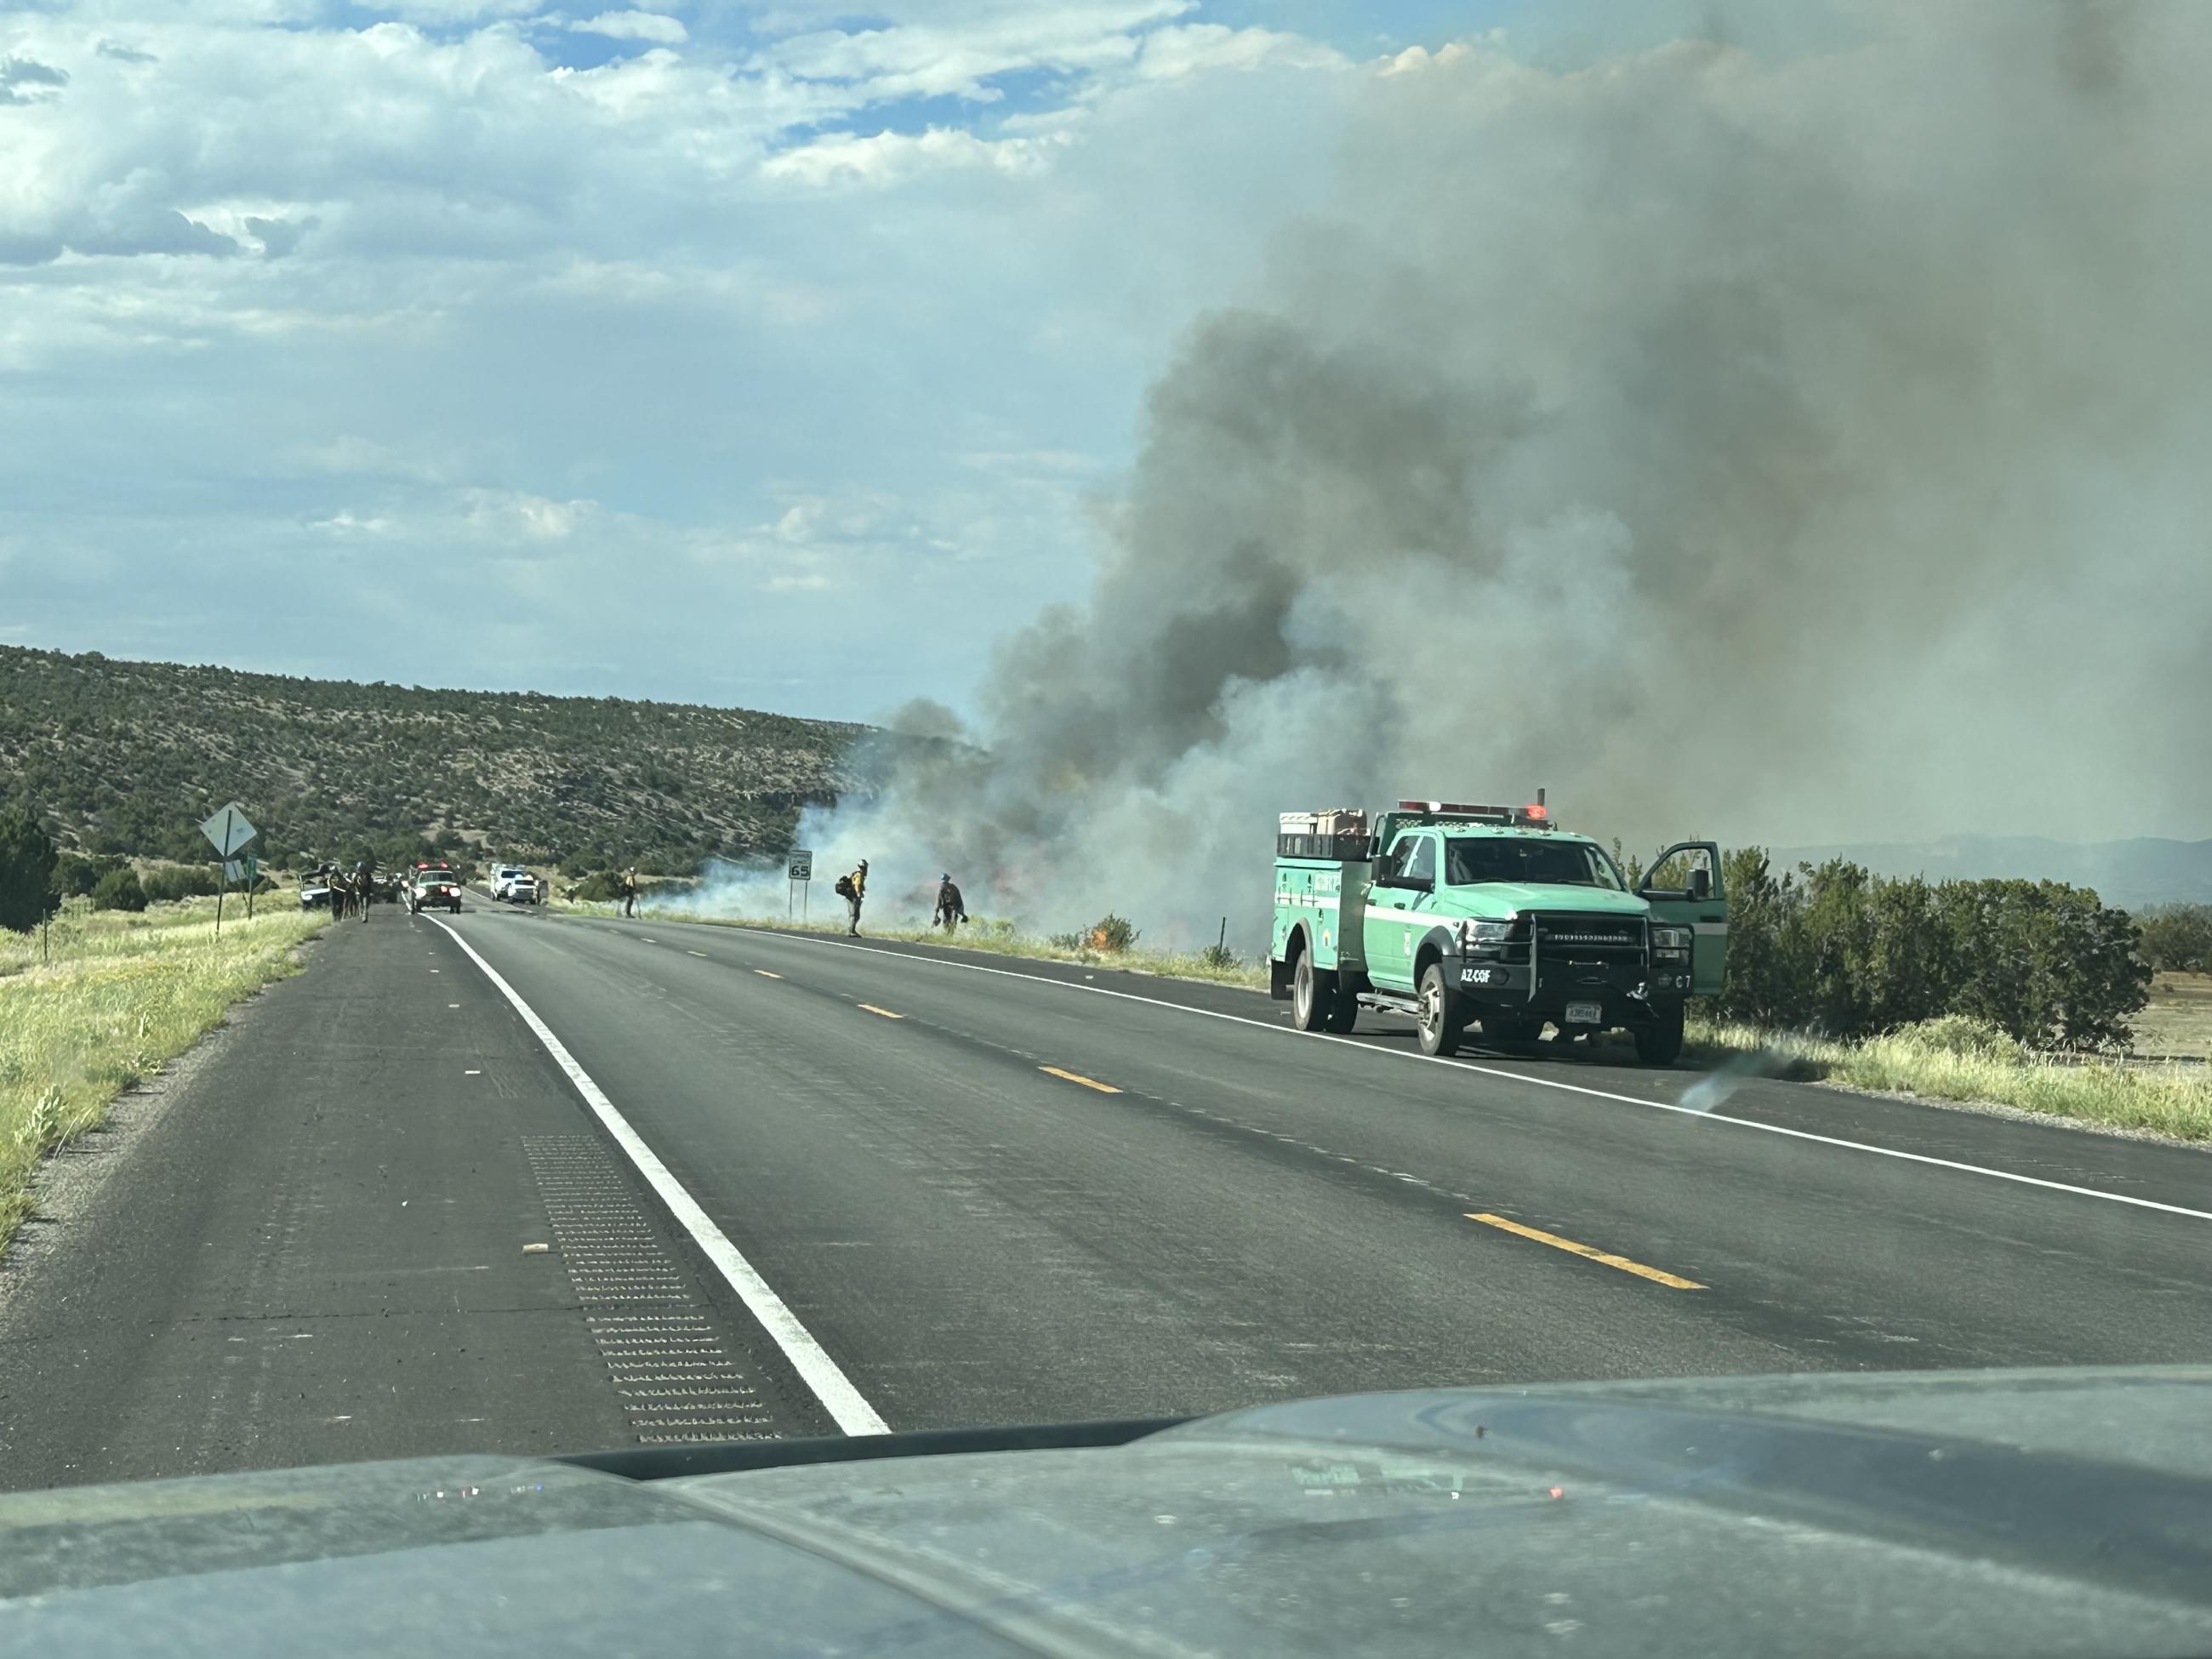 Firefighters work along the roadway of Highway 53 during the Encerrita Fire as a smoke plume rises behind them and their vehicles